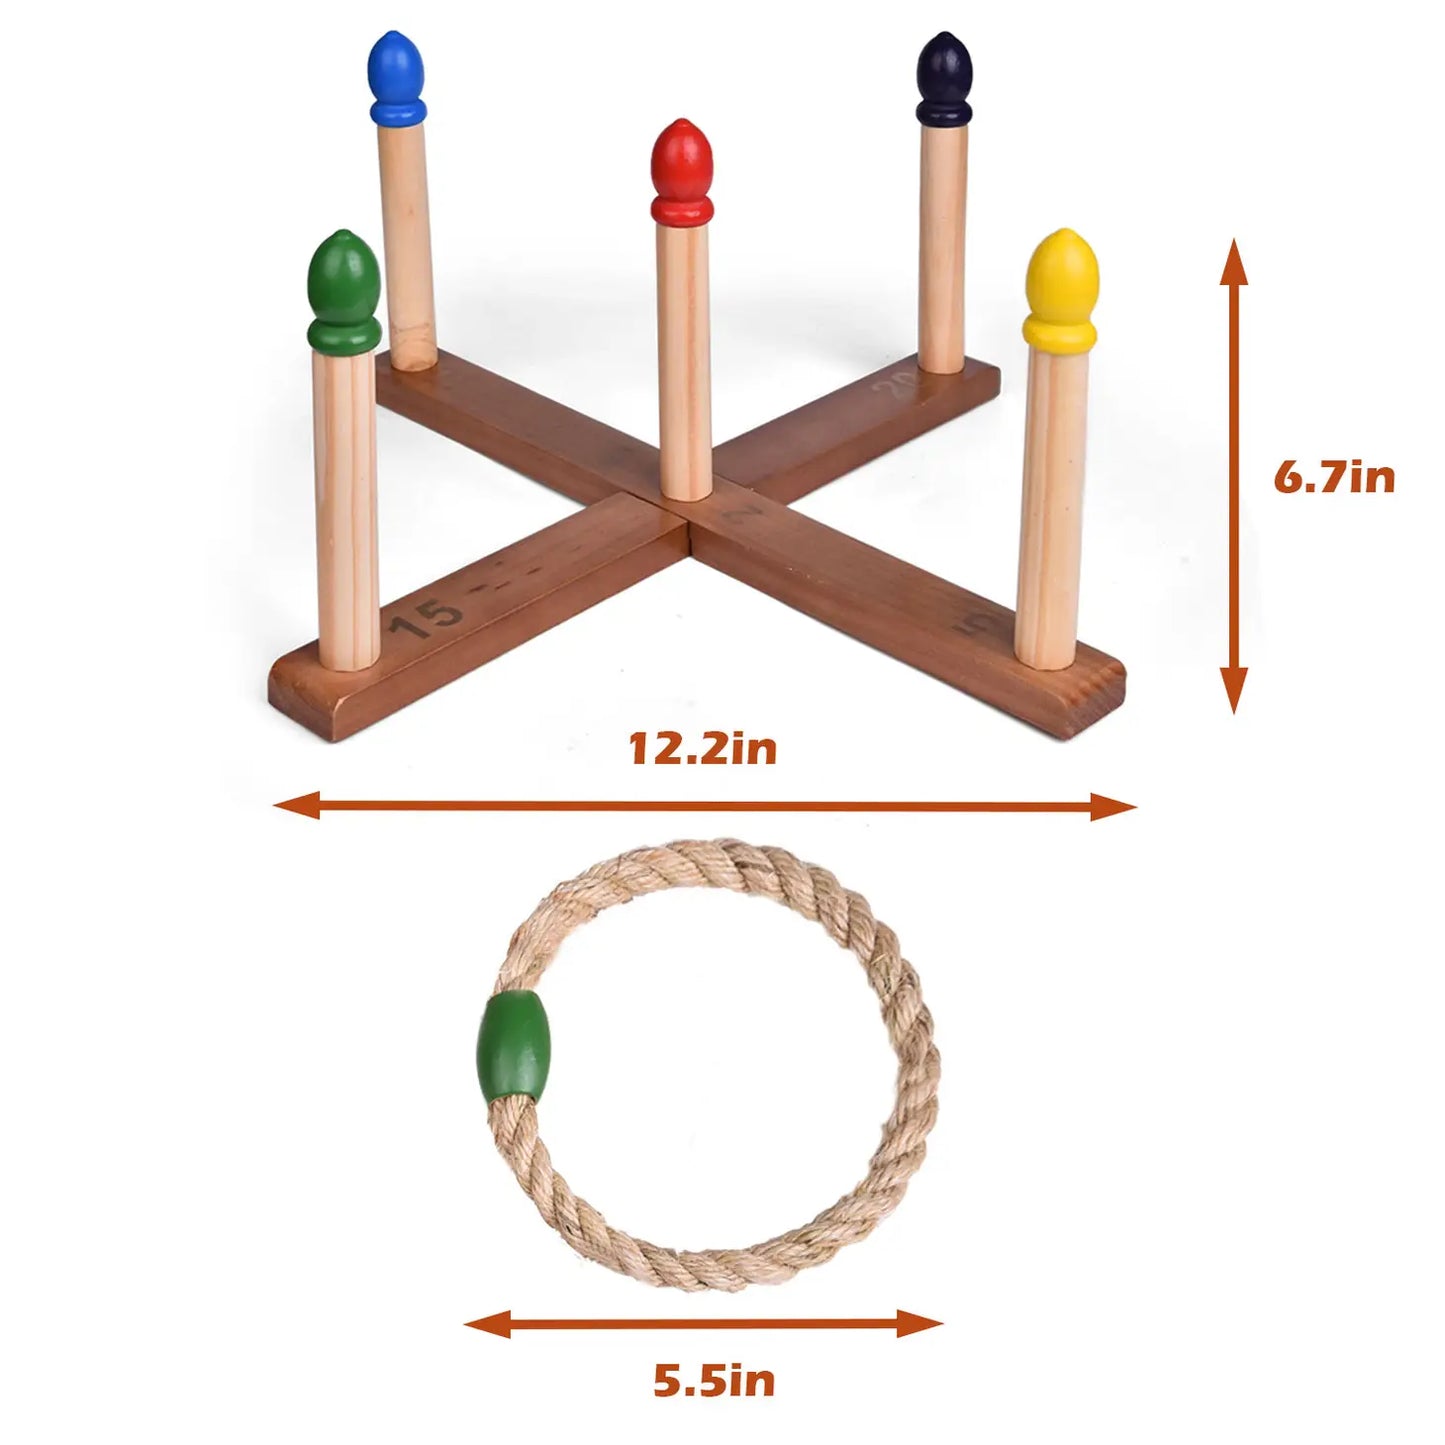 Wooden Ring Toss Outdoor Game